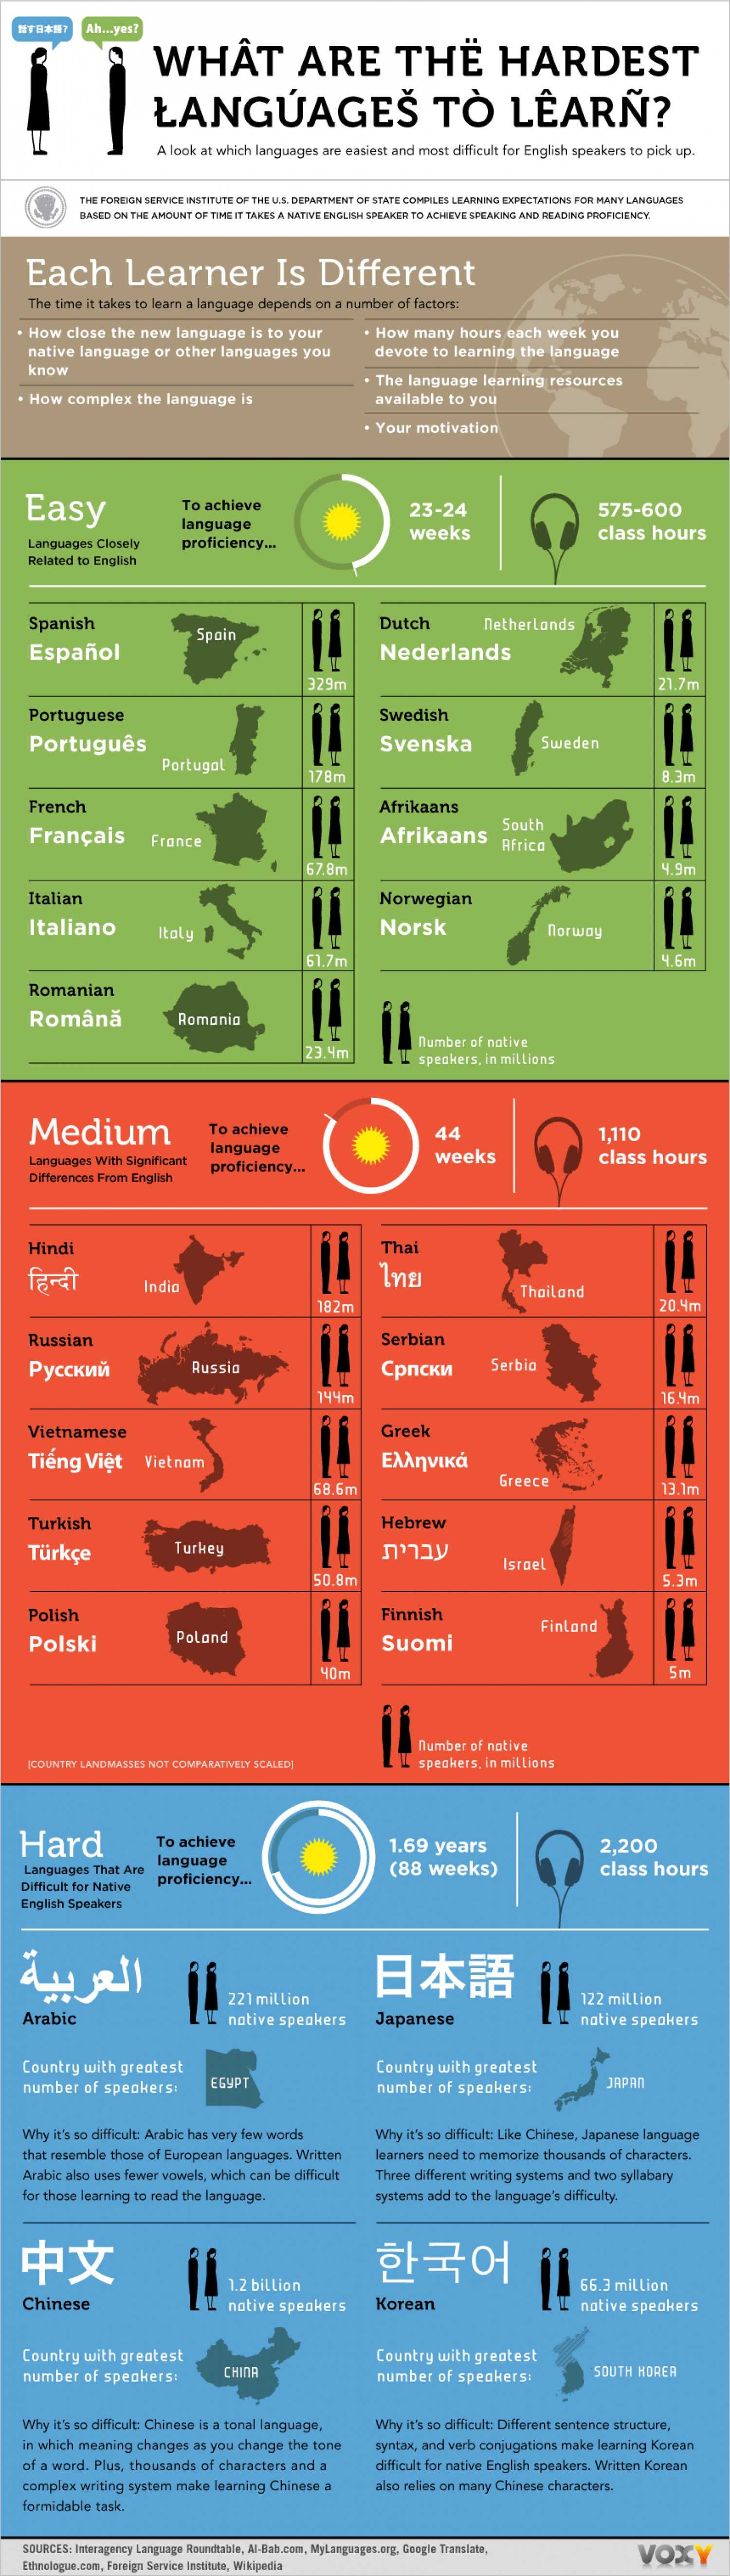 The Hardest Languages To Learn